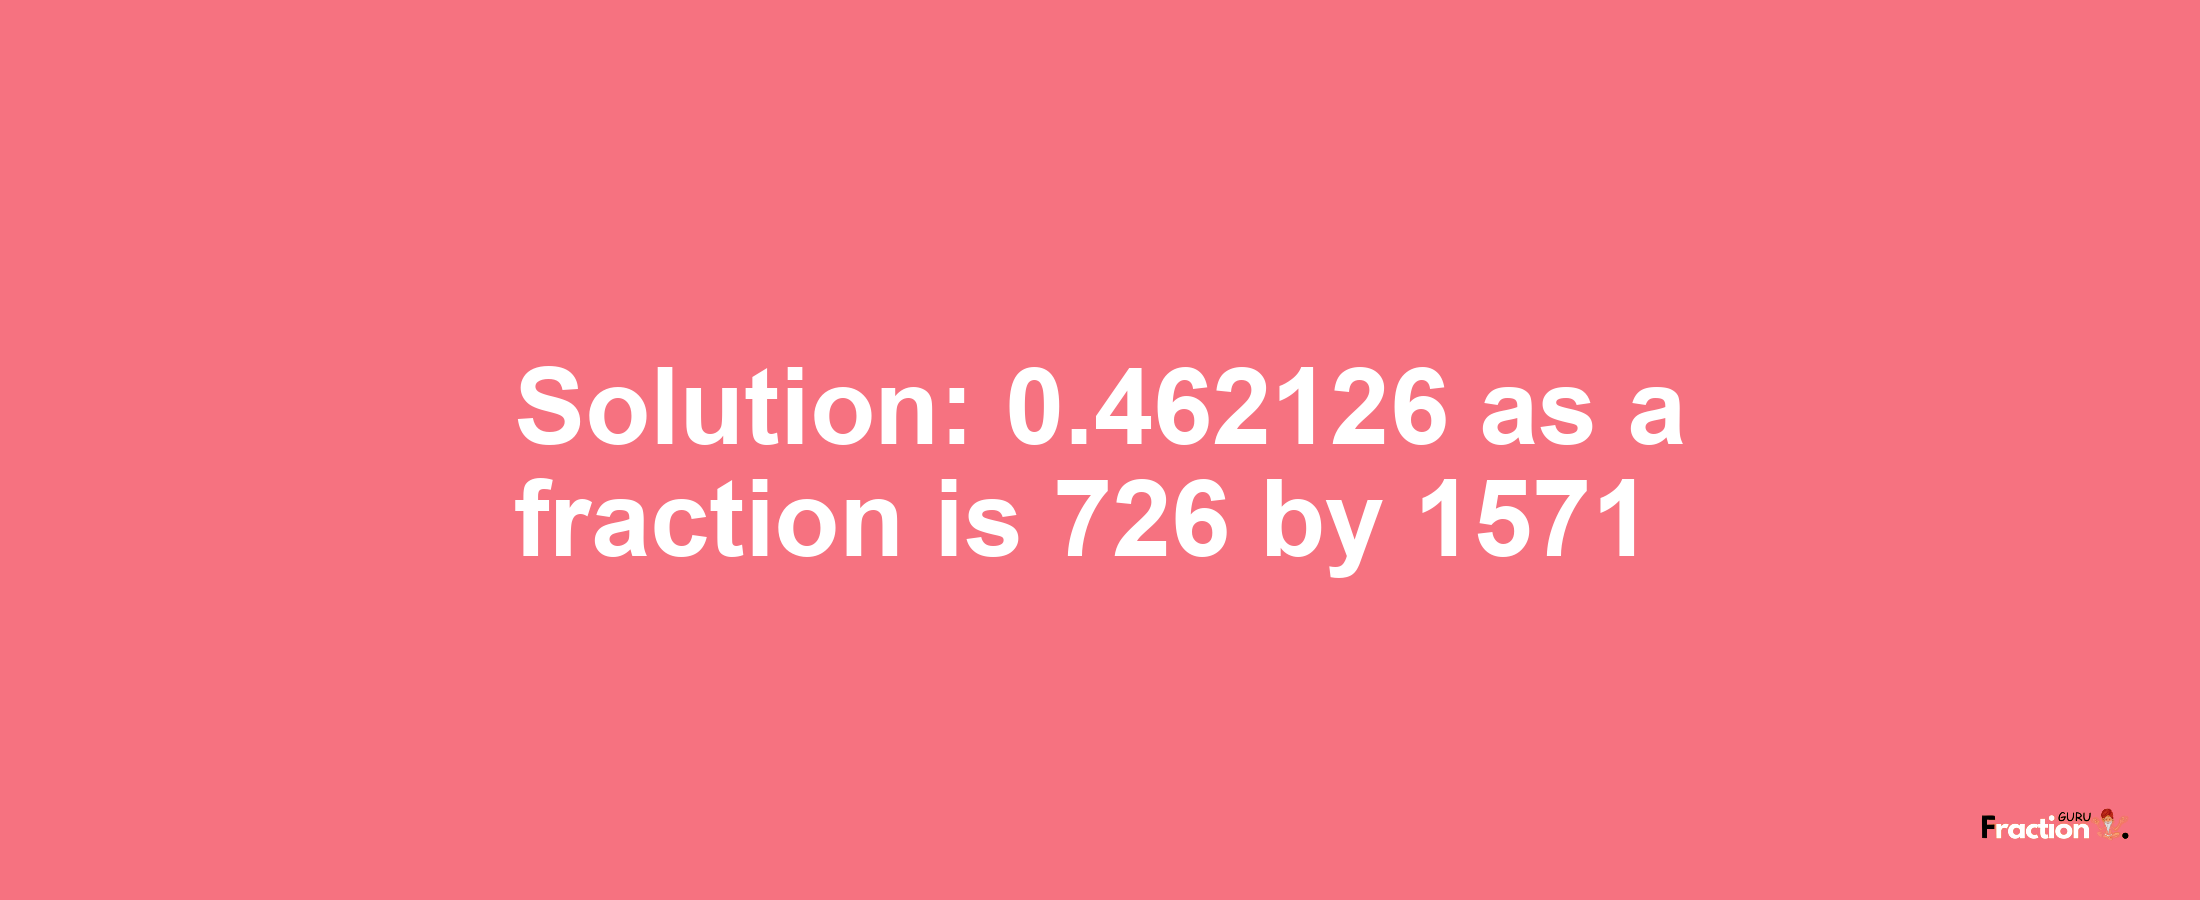 Solution:0.462126 as a fraction is 726/1571